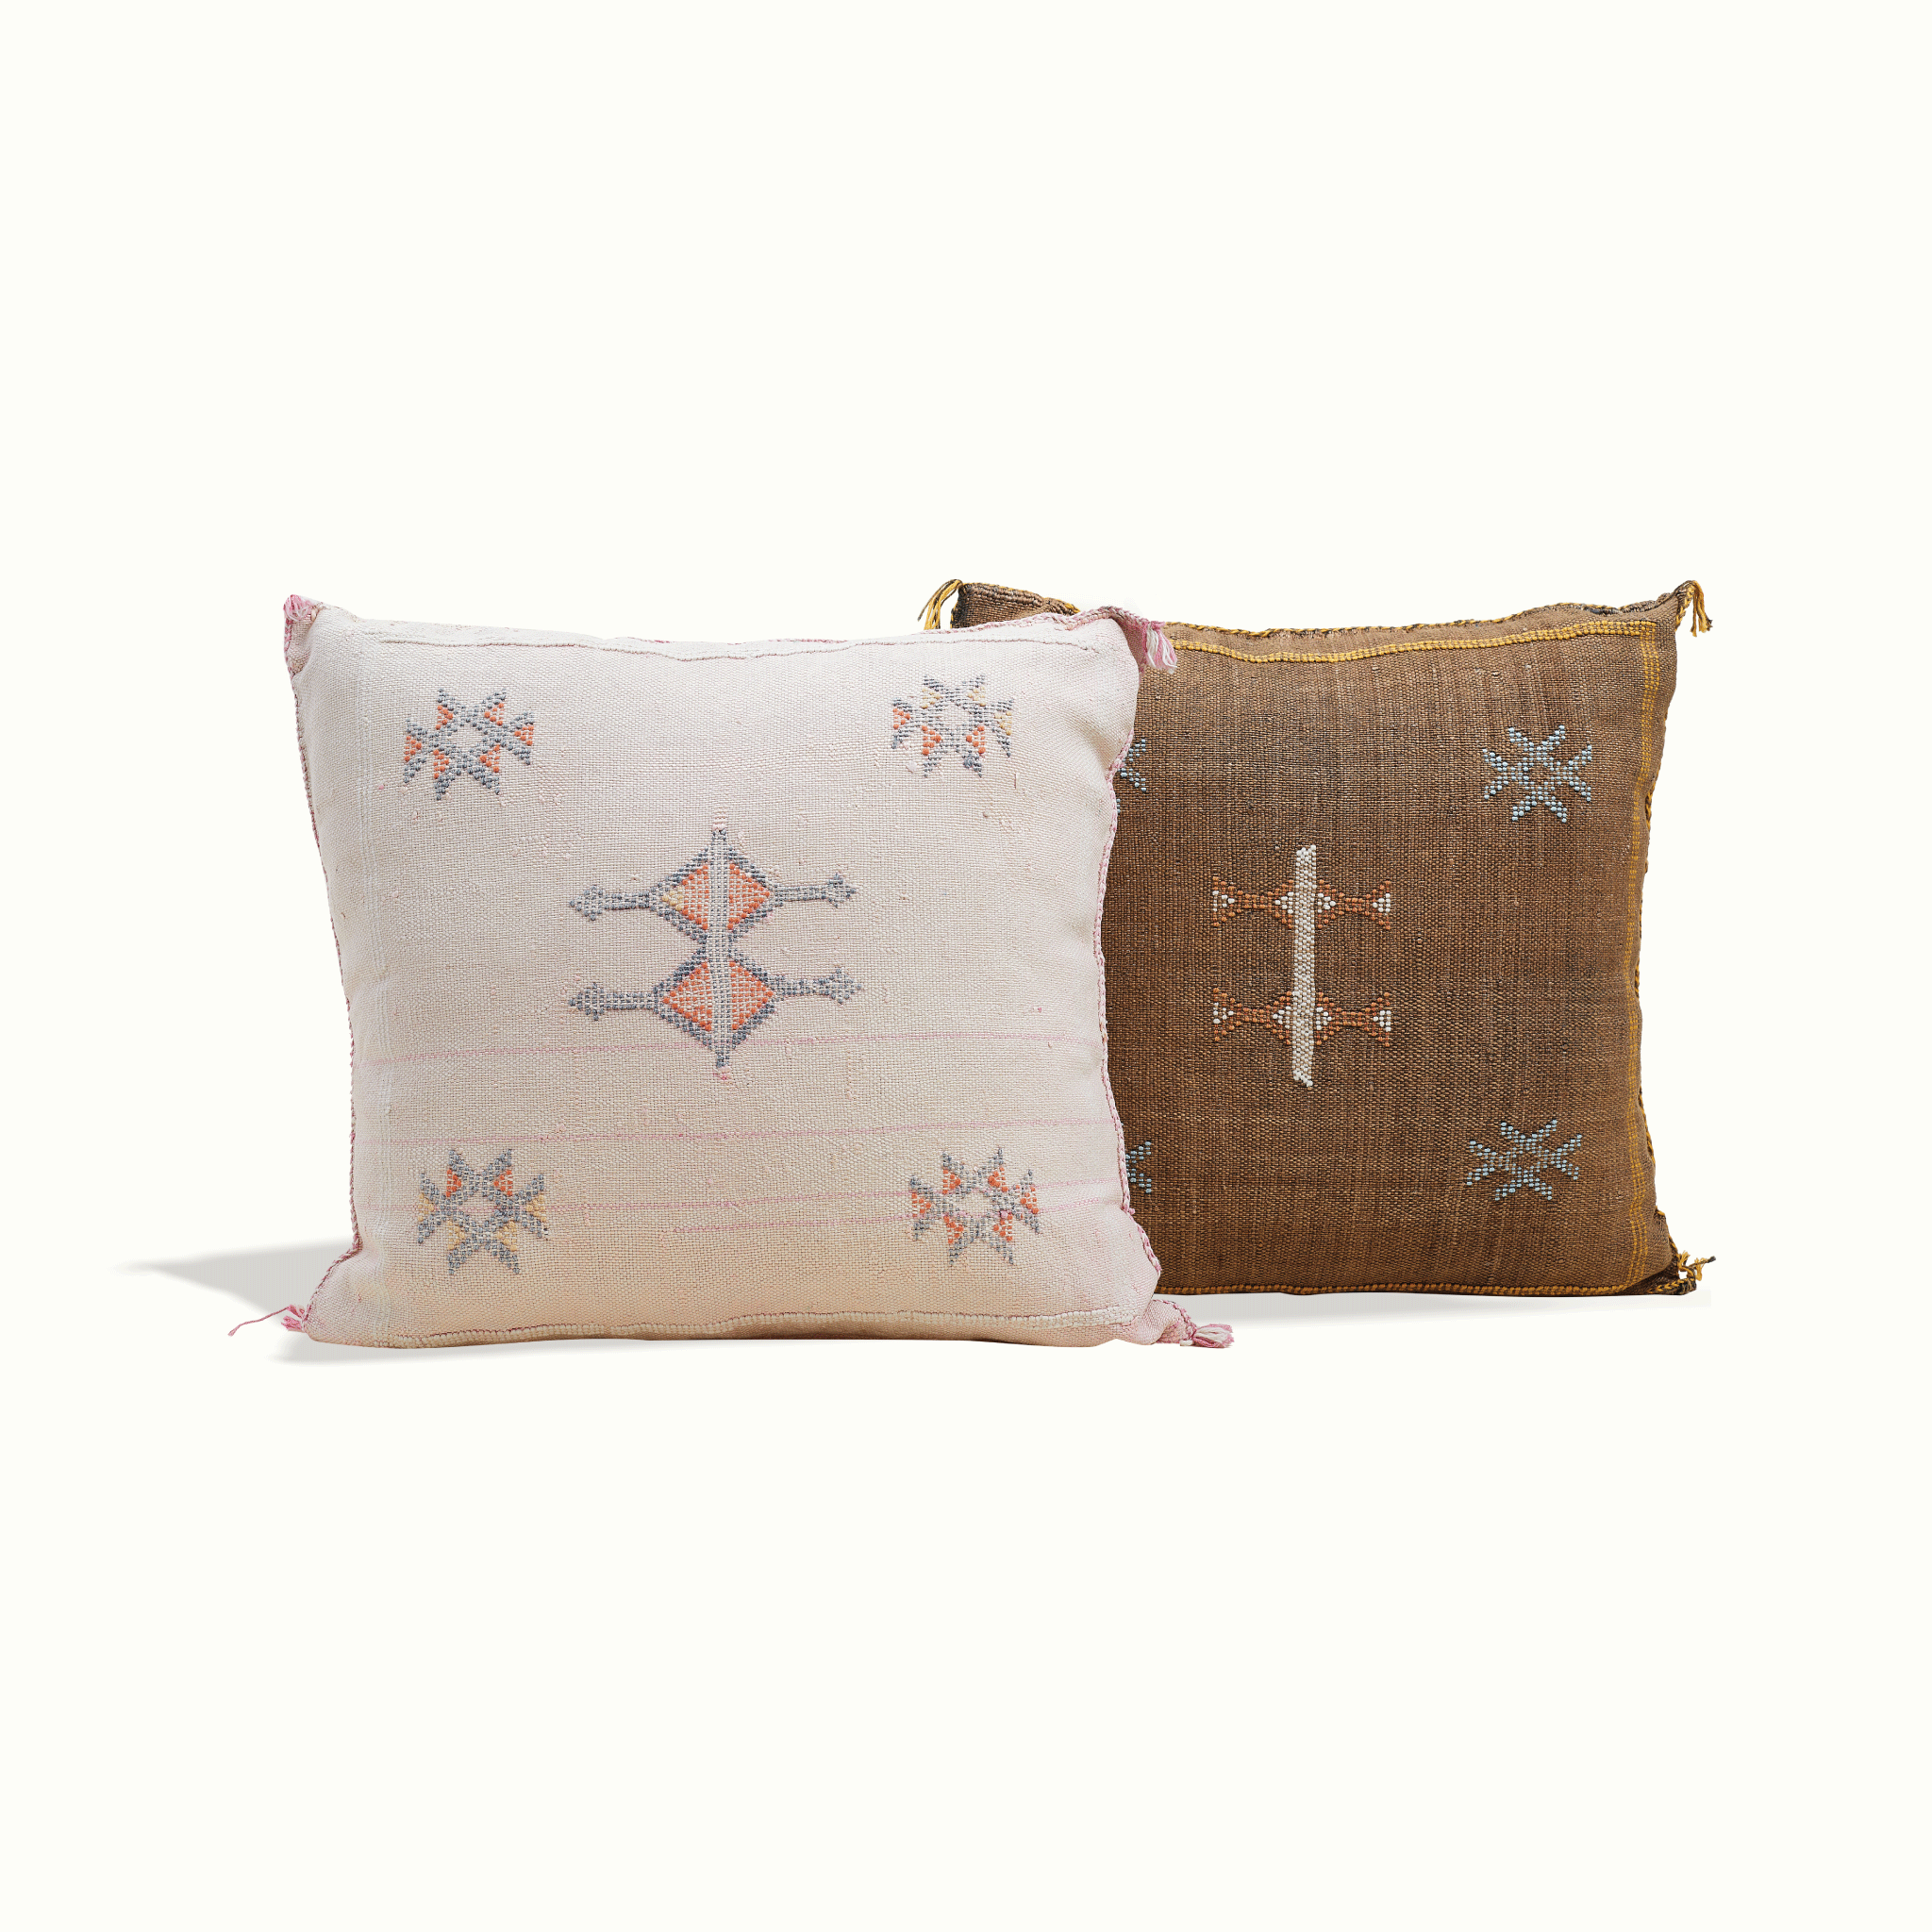 Moroccan Cactus Silk Pillow Square Handcrafted for Hotel Ynez by Nomada Deco